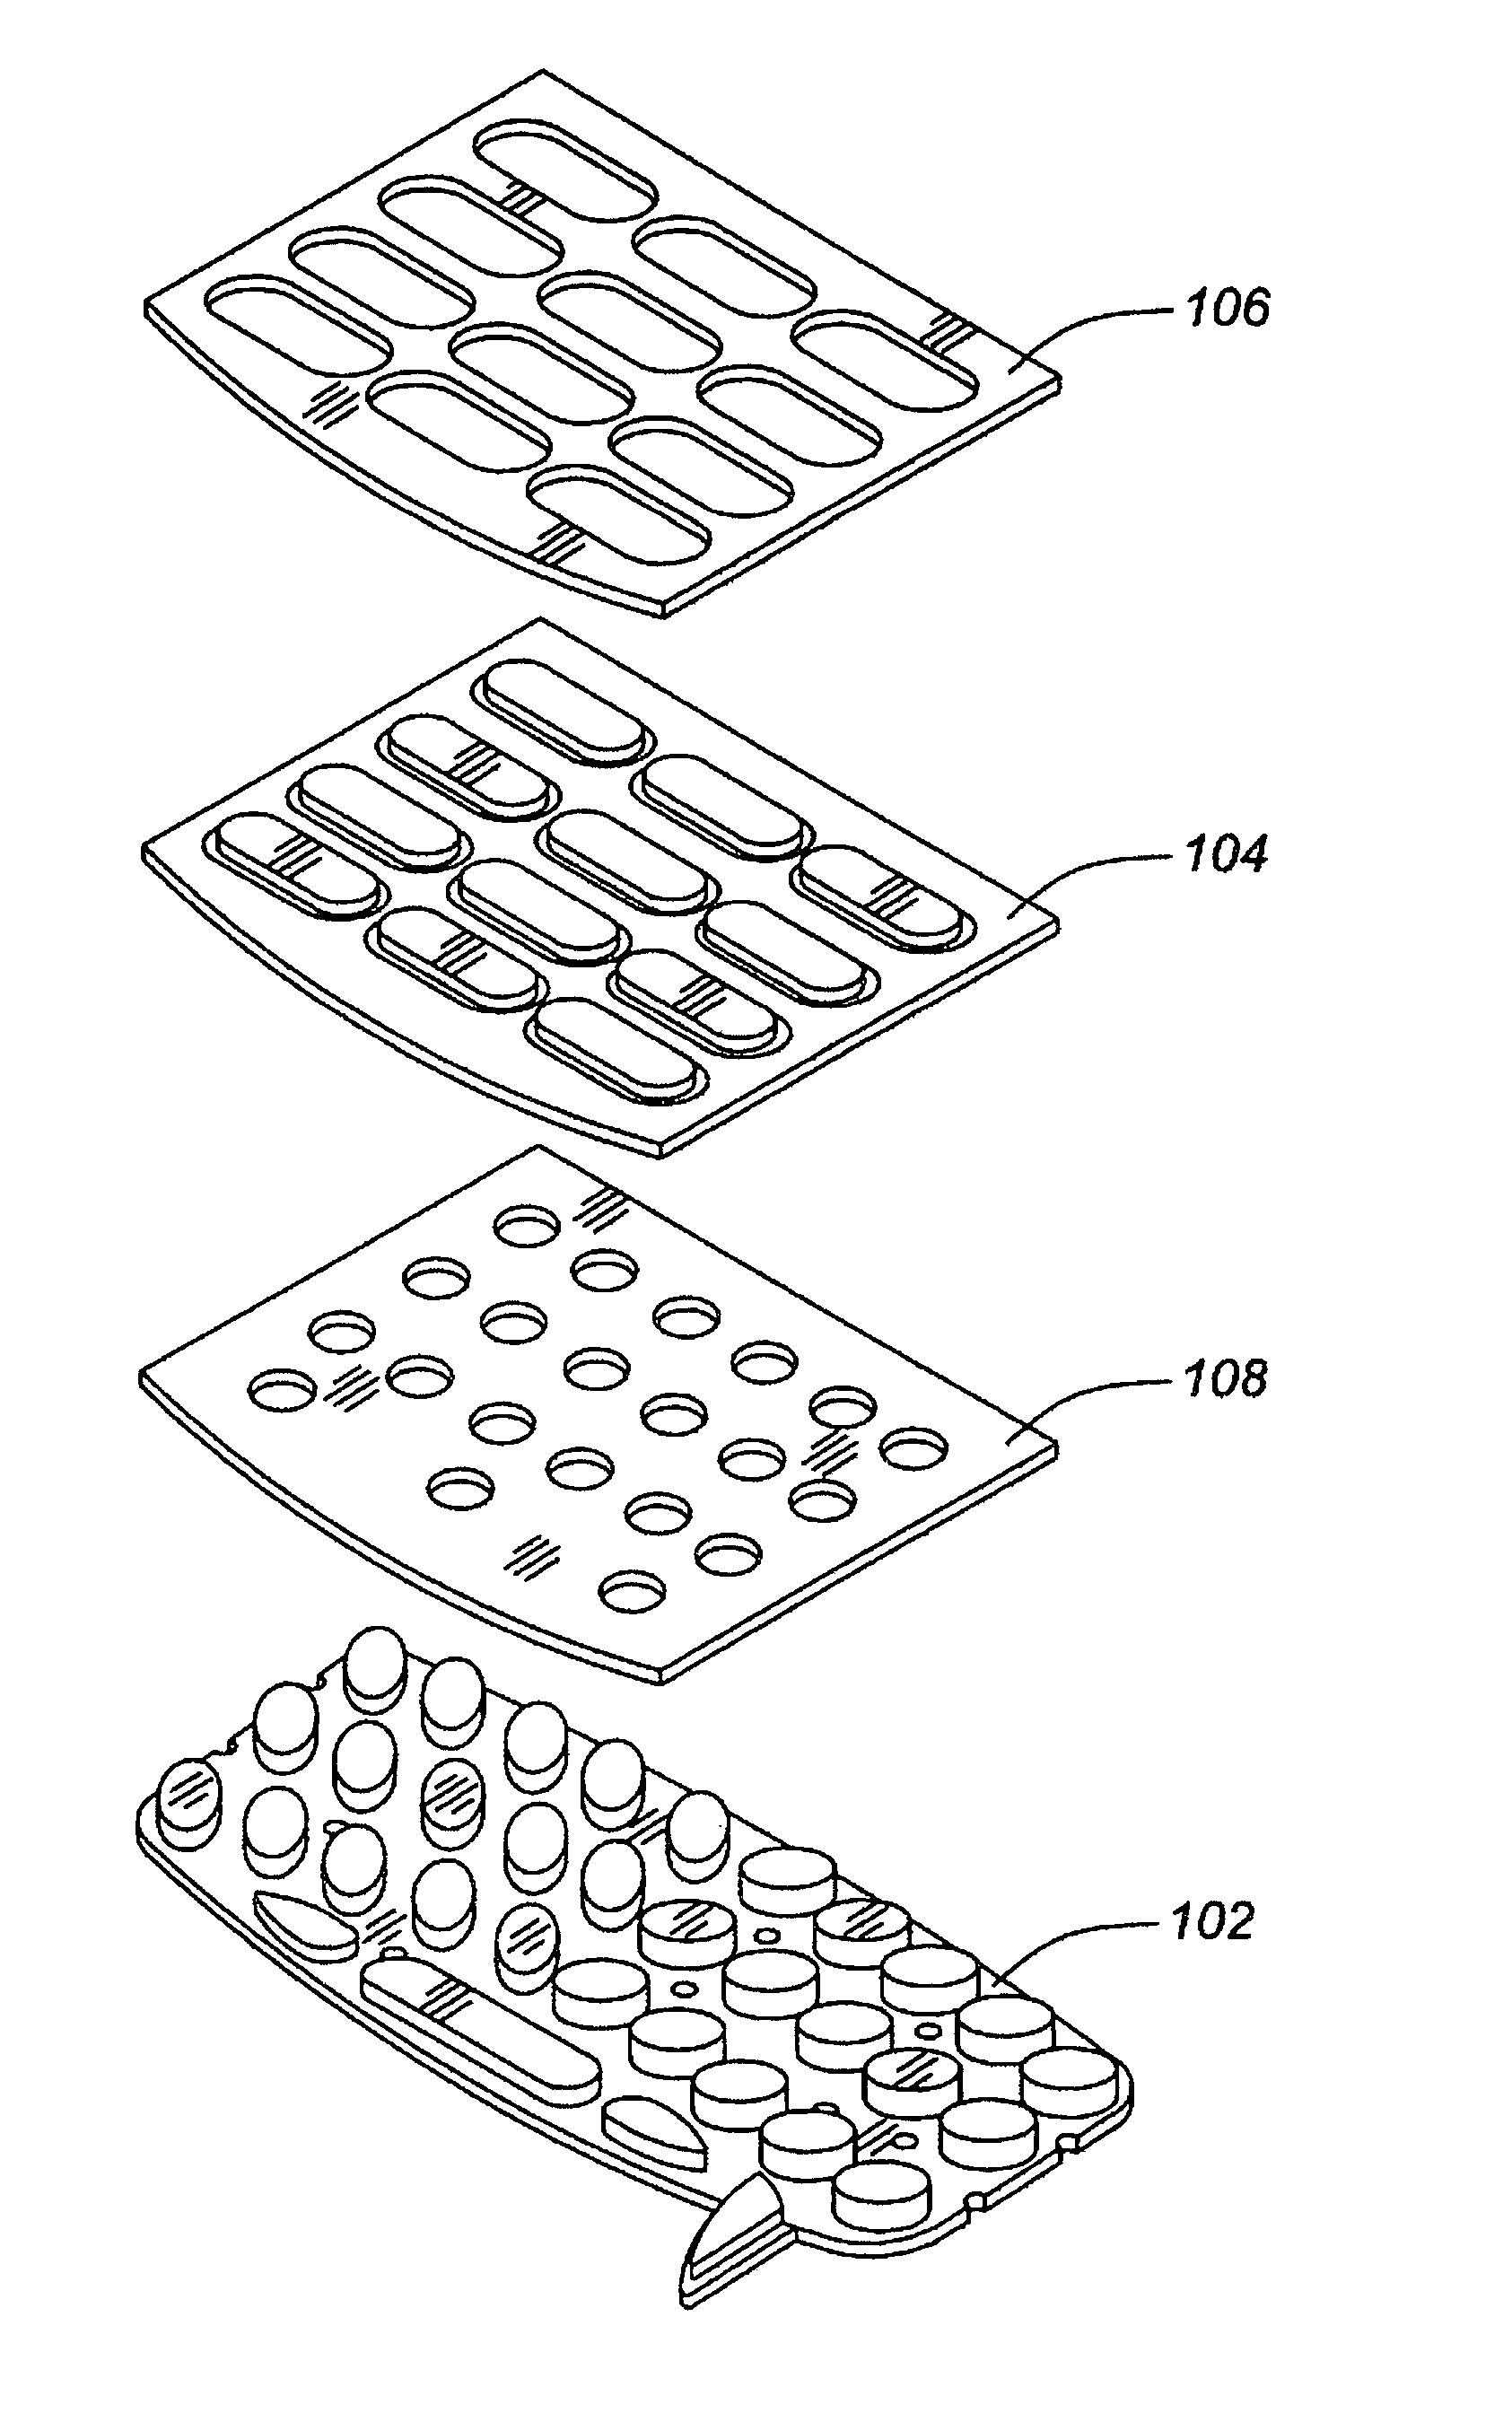 Cover plate for a mobile device having a push-through dial keypad